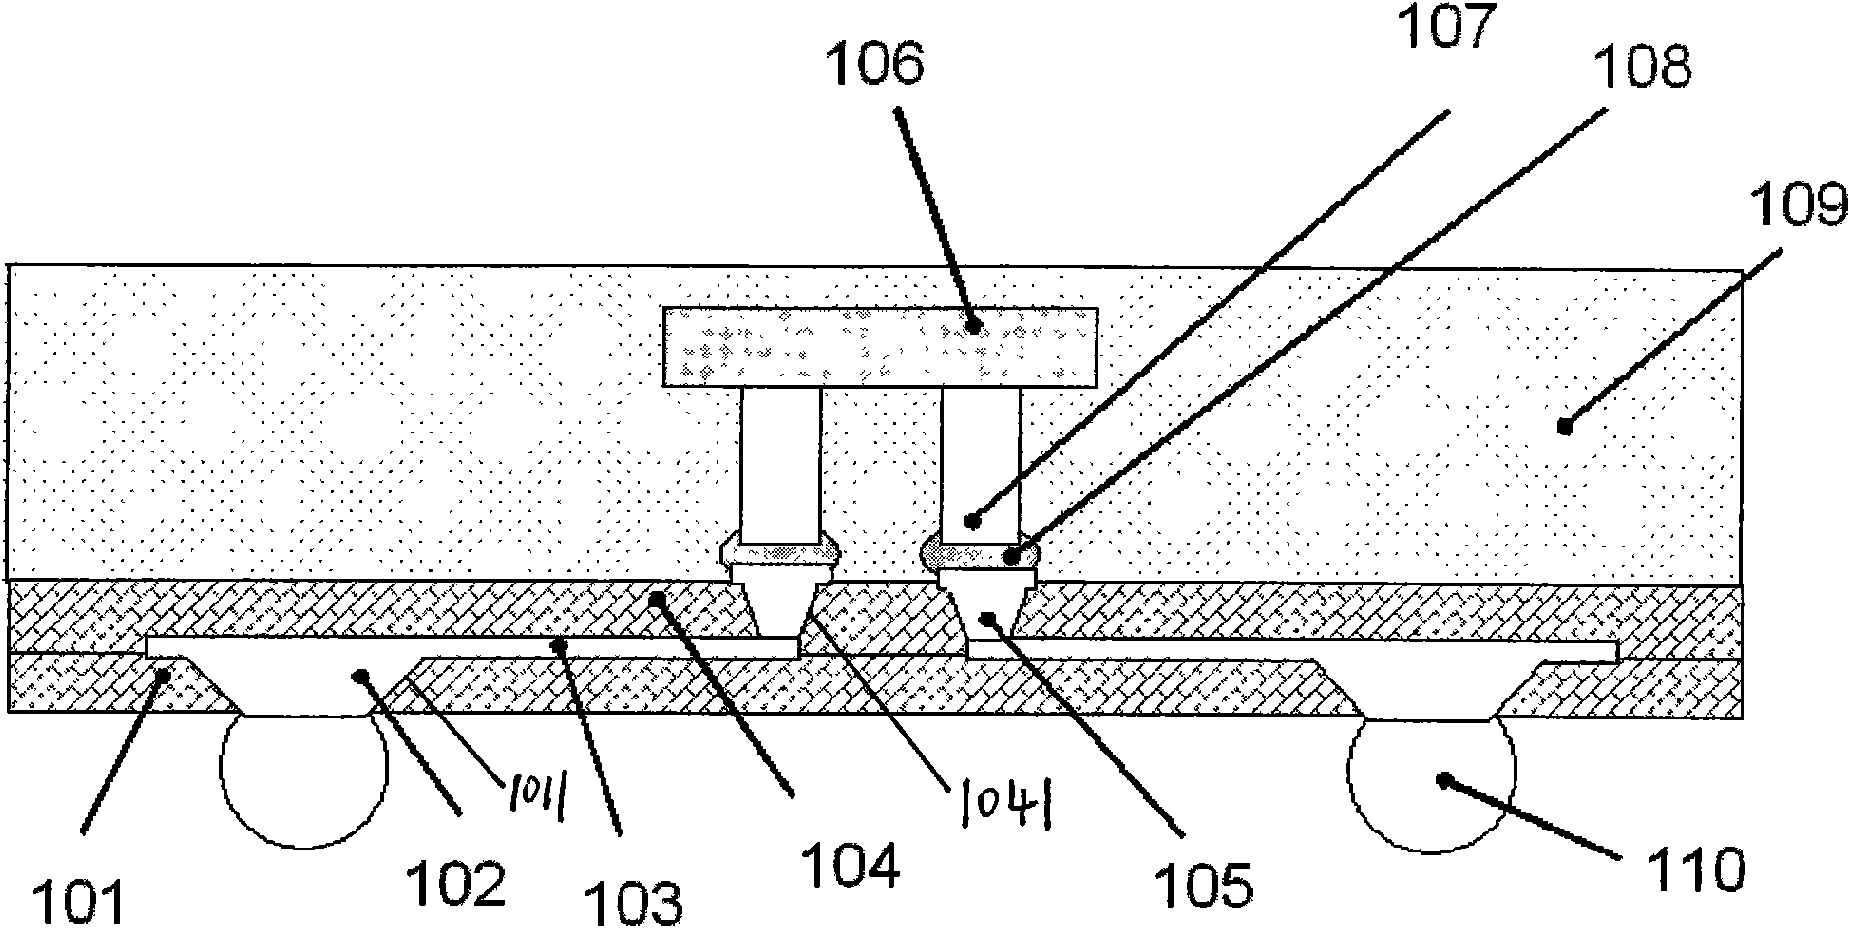 Wafer level fan-out chip packaging structure